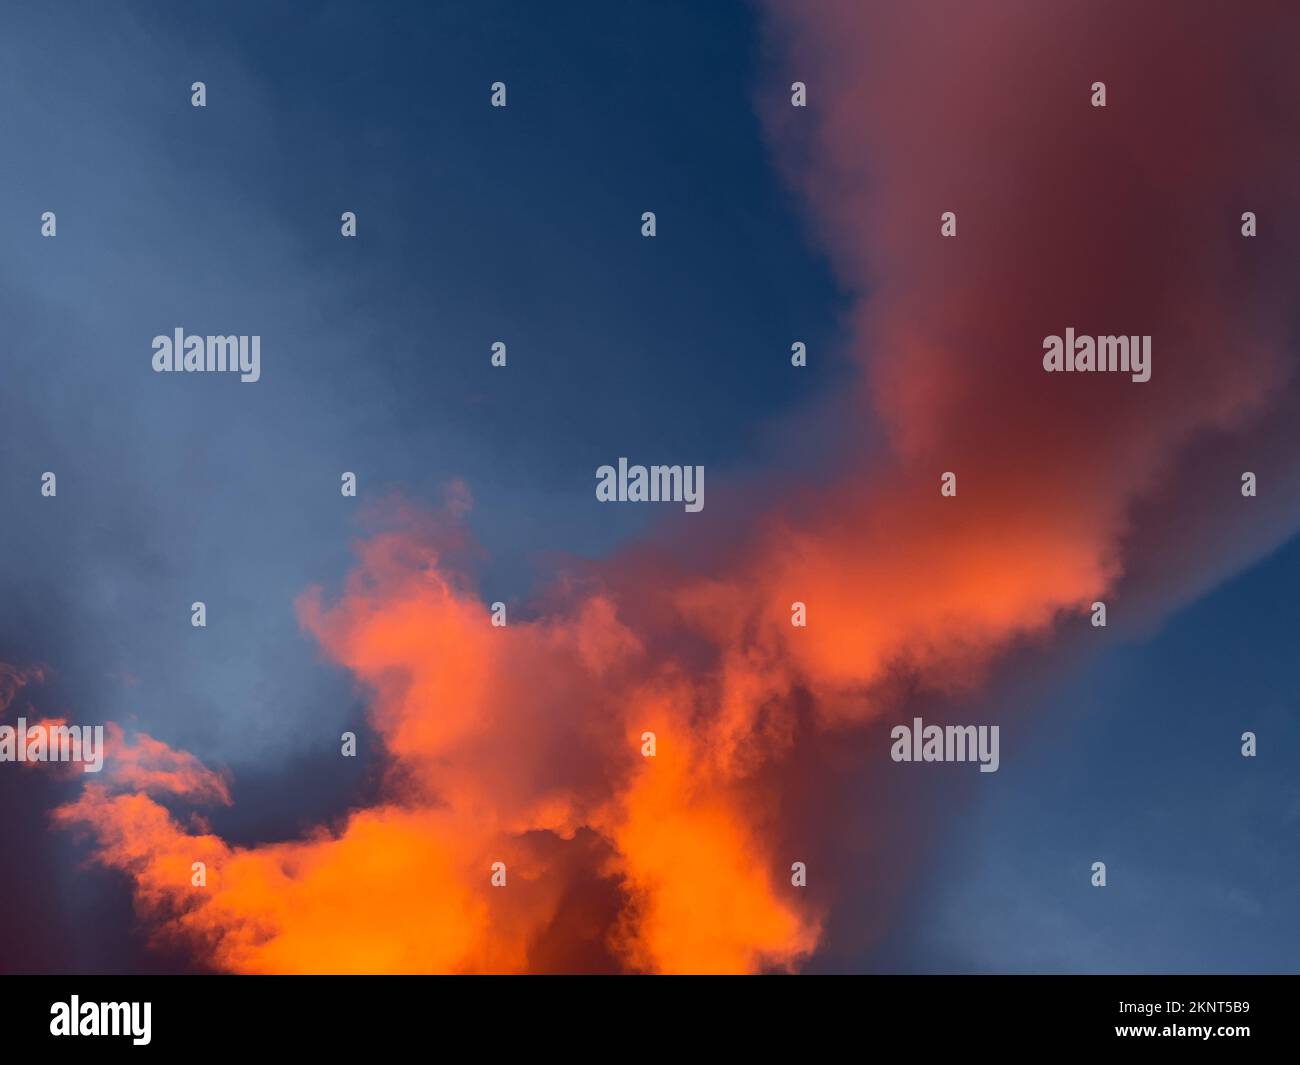 Sunrise overhead looks like bright orange fire in the dark blue sky. Clouds are large and swirling. Stock Photo